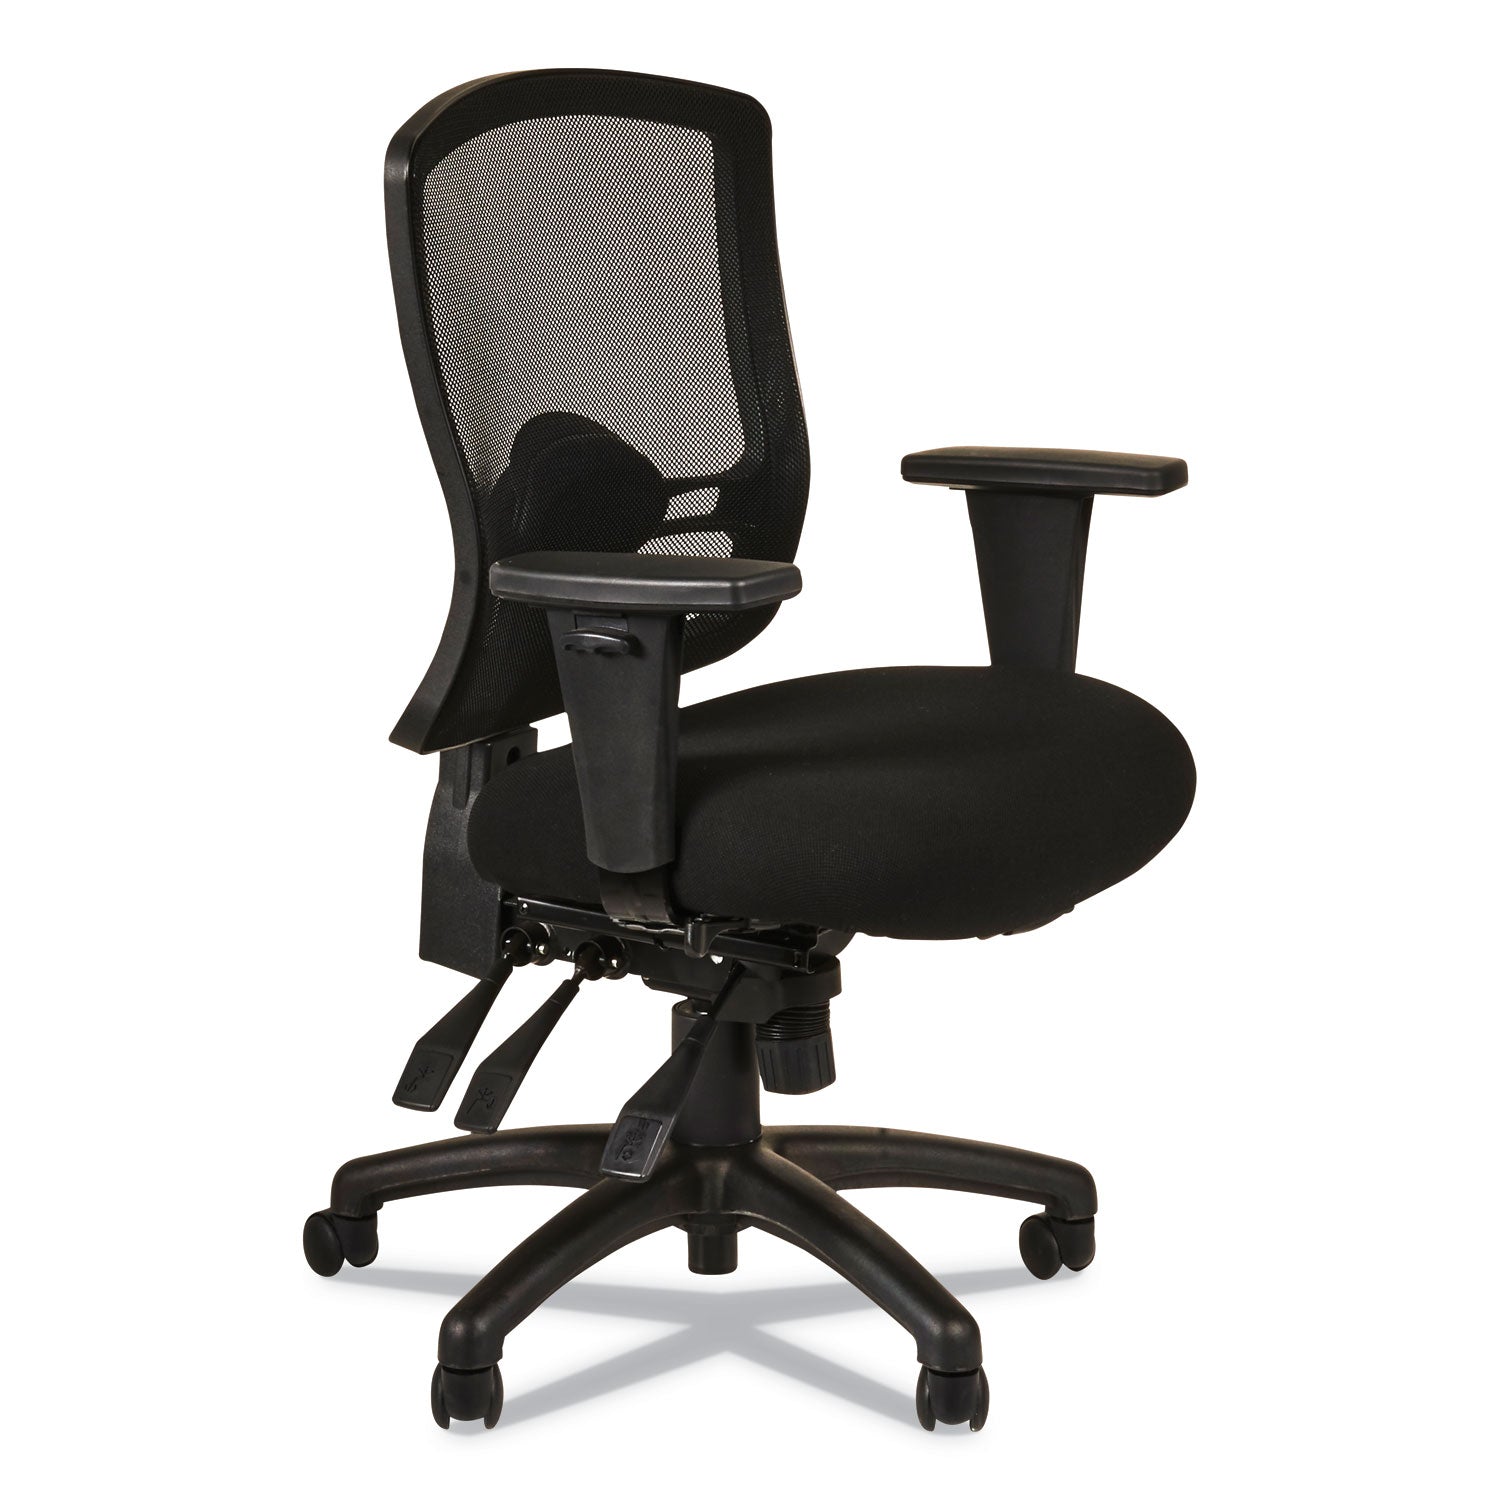 alera-etros-series-mid-back-multifunction-with-seat-slide-chair-supports-up-to-275-lb-1783-to-2145-seat-height-black_aleet4217 - 1